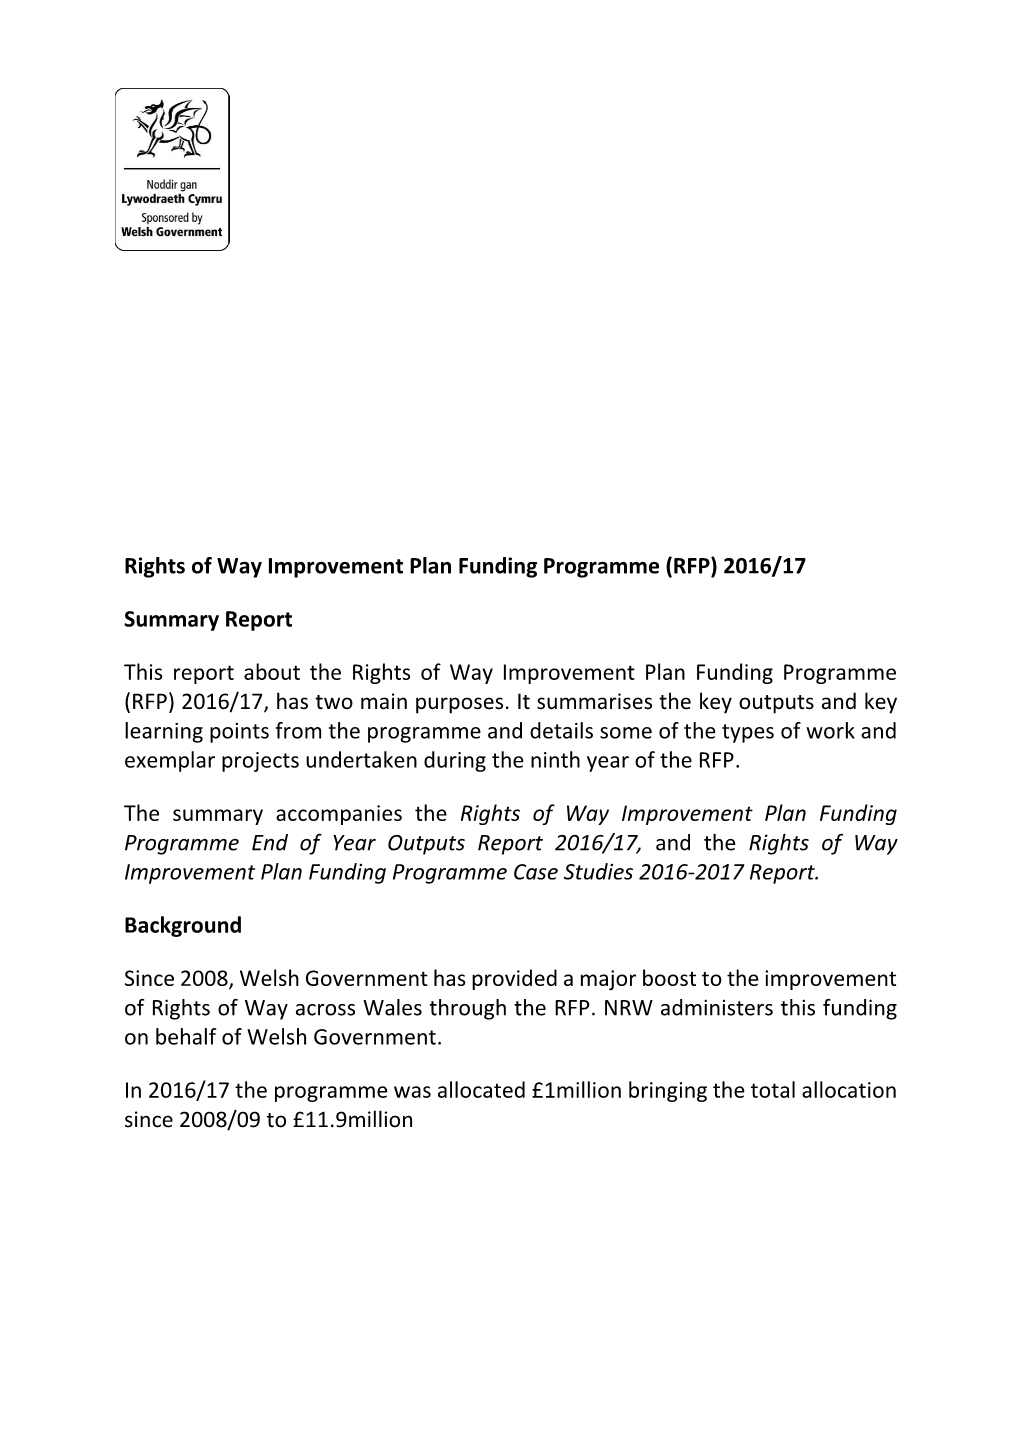 Rights of Way Improvement Plan Funding Programme (RFP) 2016/17